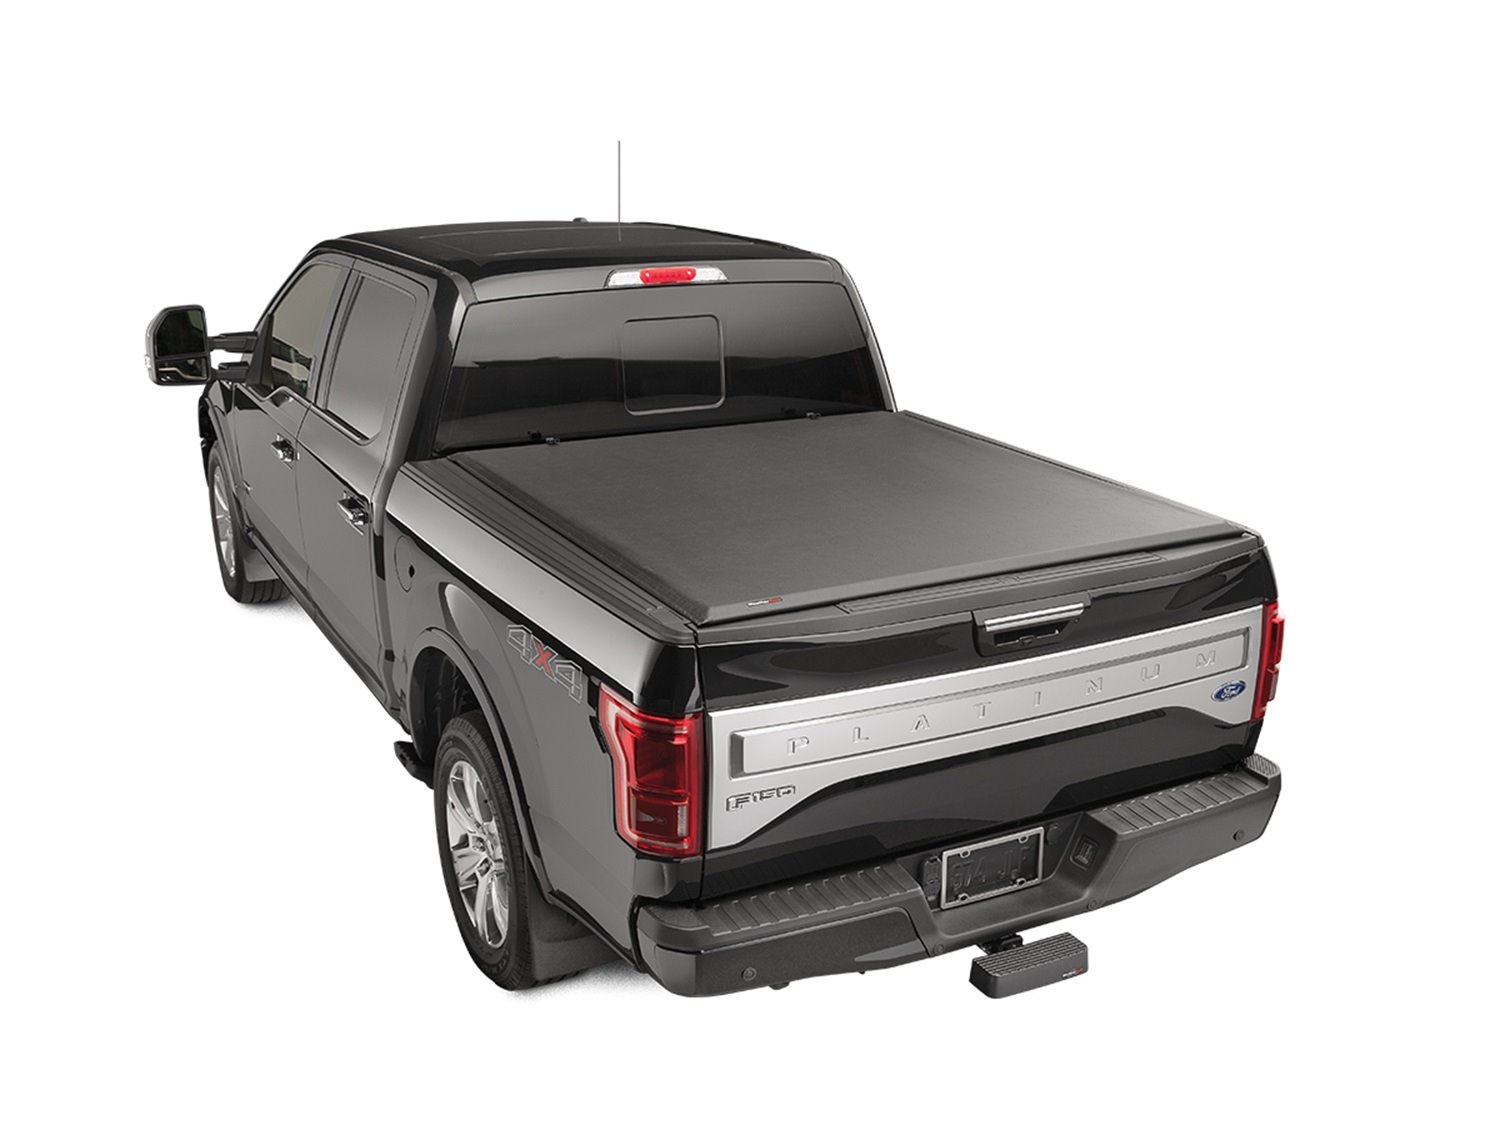 ROLL UP TRUCK BED COVER B CHEVROLET COLORADO 2015-2017 REG. & EXT. CAB 5 BED